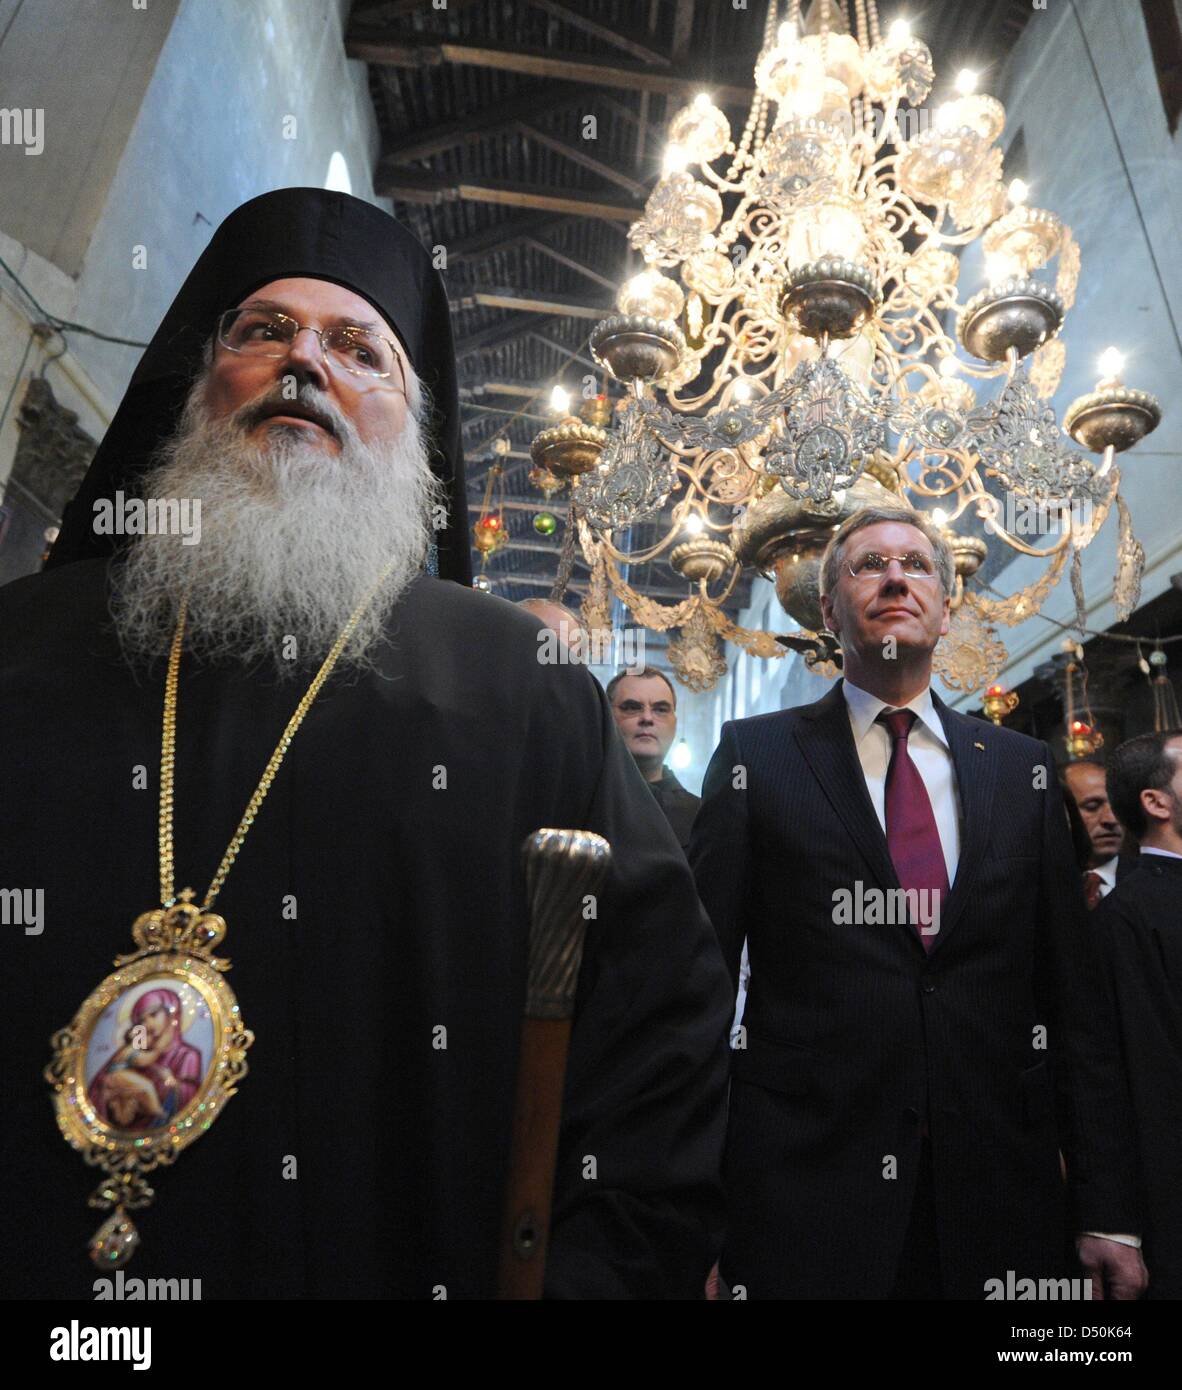 German President Christian Wulff (R) and his daughter Annalena (not pictured) walk through the Church of the Nativity together with Greek-Orthodox bishop Theoflakes (L) in Bethlehem, Palestinian Territories, 30 November 2010. The four-day state visit of German President Wulff will end today with his visit to the Palestinian Territories. Photo: RAINER JENSEN Stock Photo